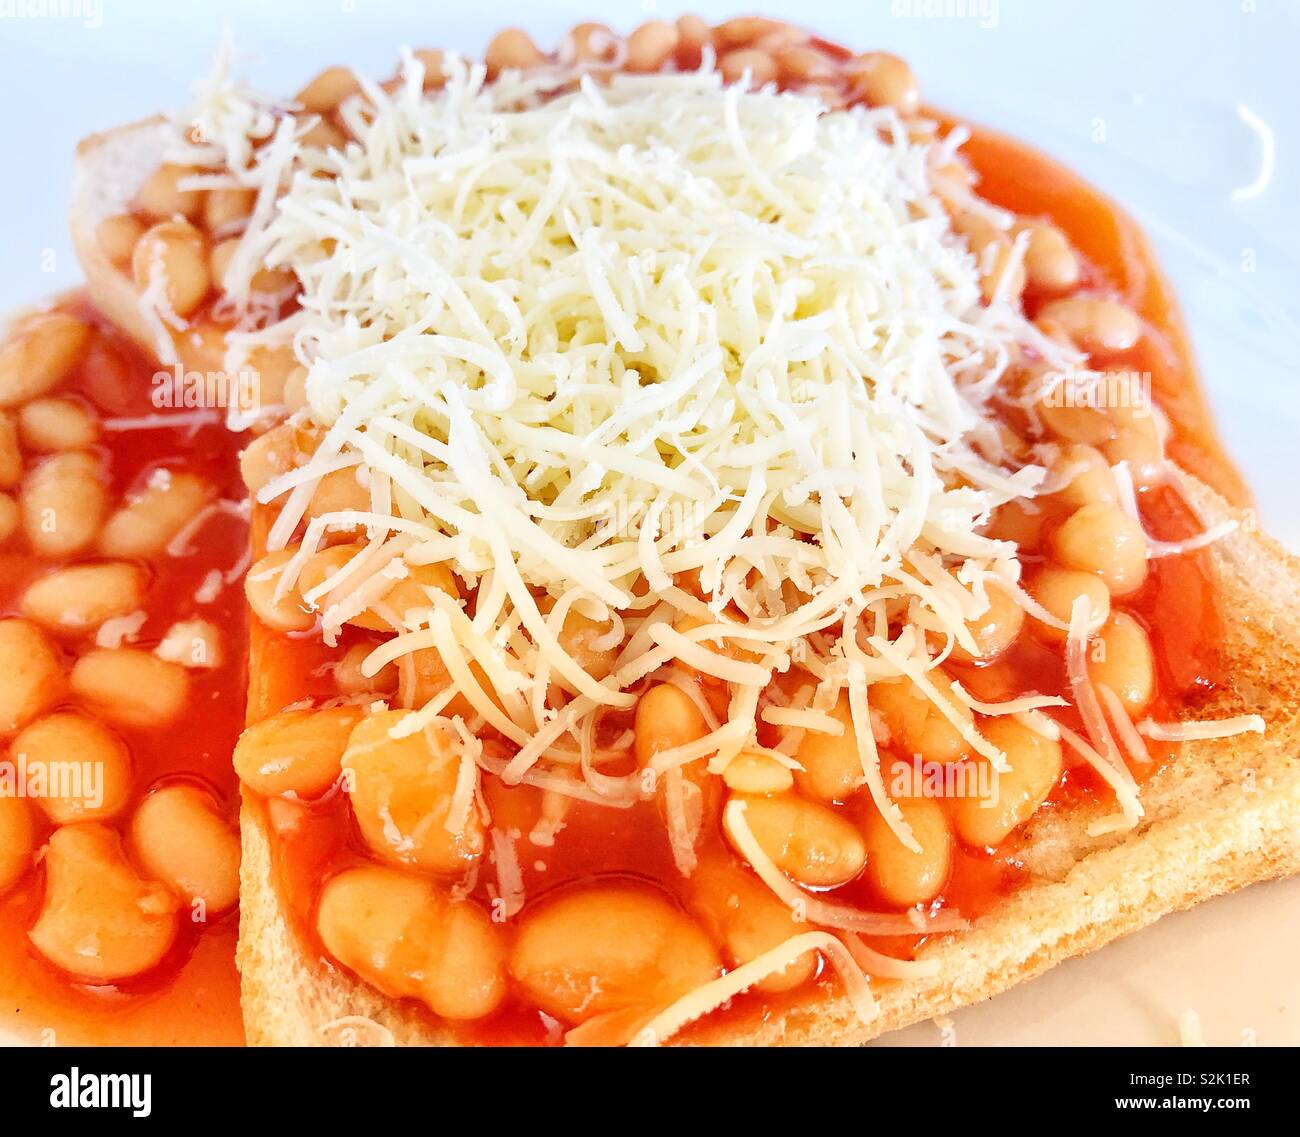 Beans on toast with cheese Stock Photo